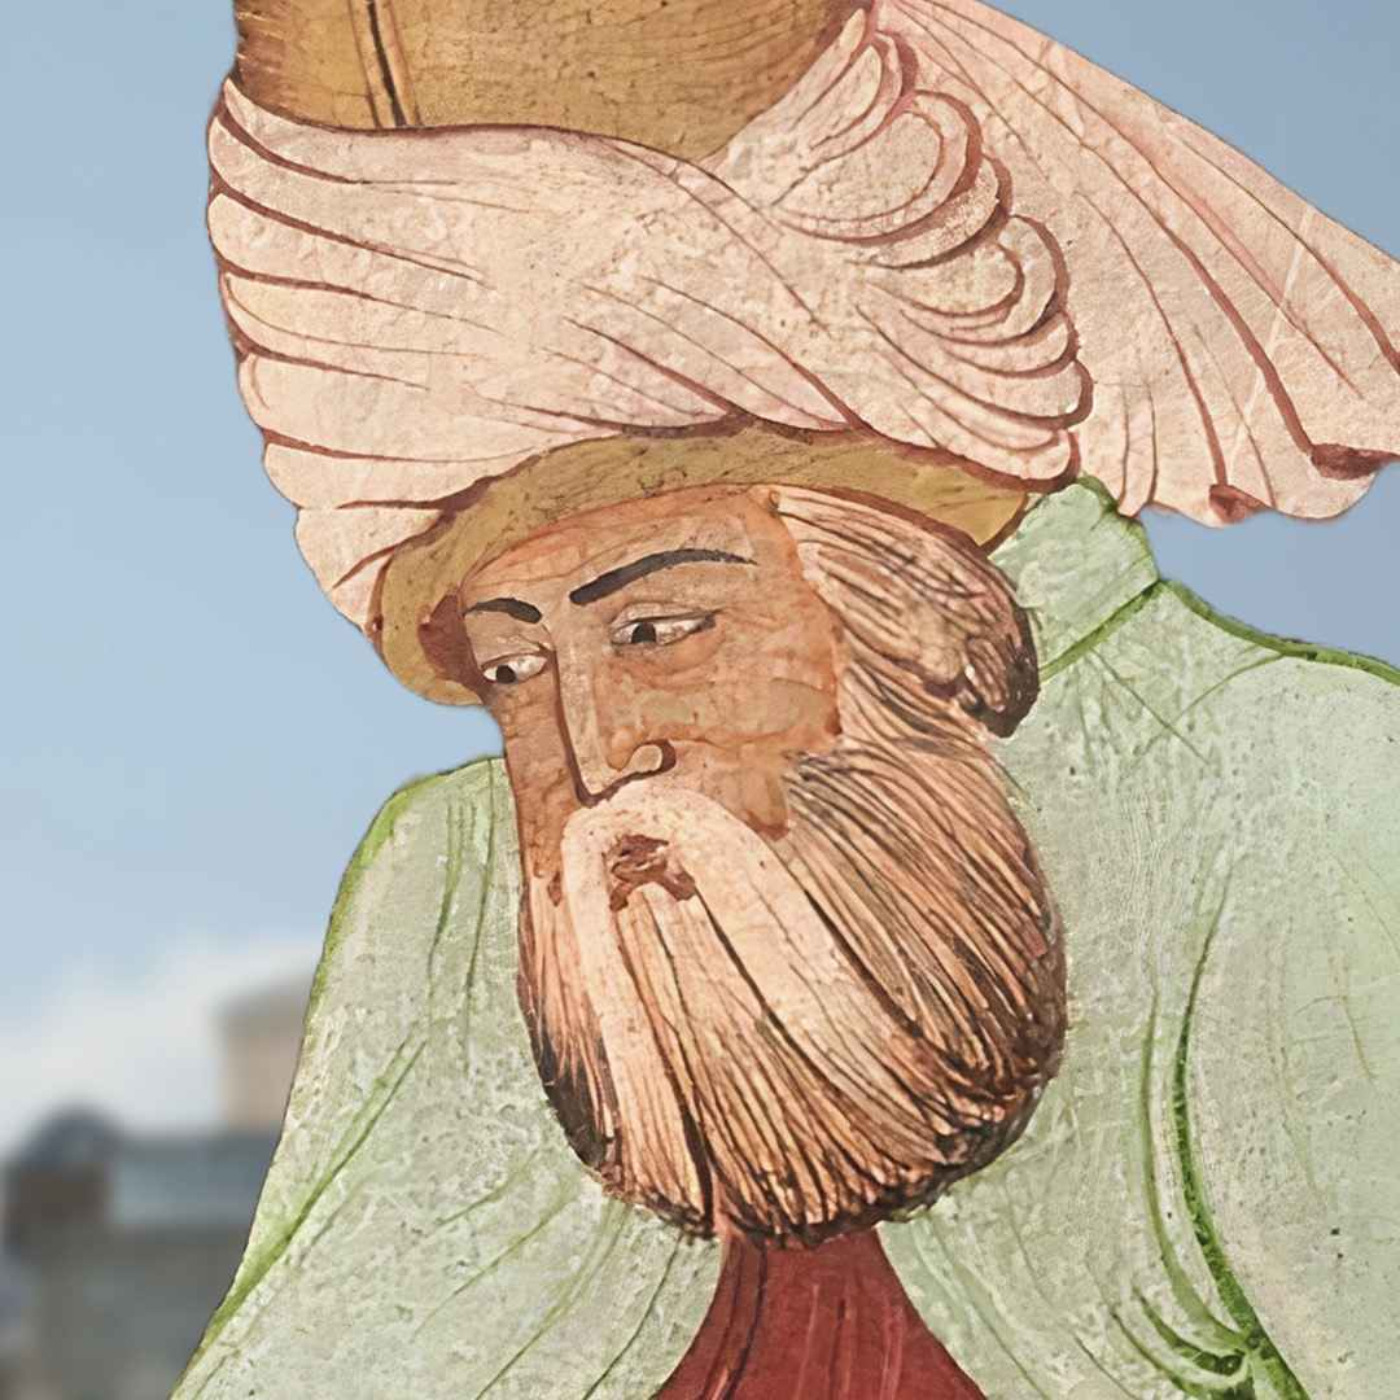 Rumi - The Most Famous Sufi Poet in the World